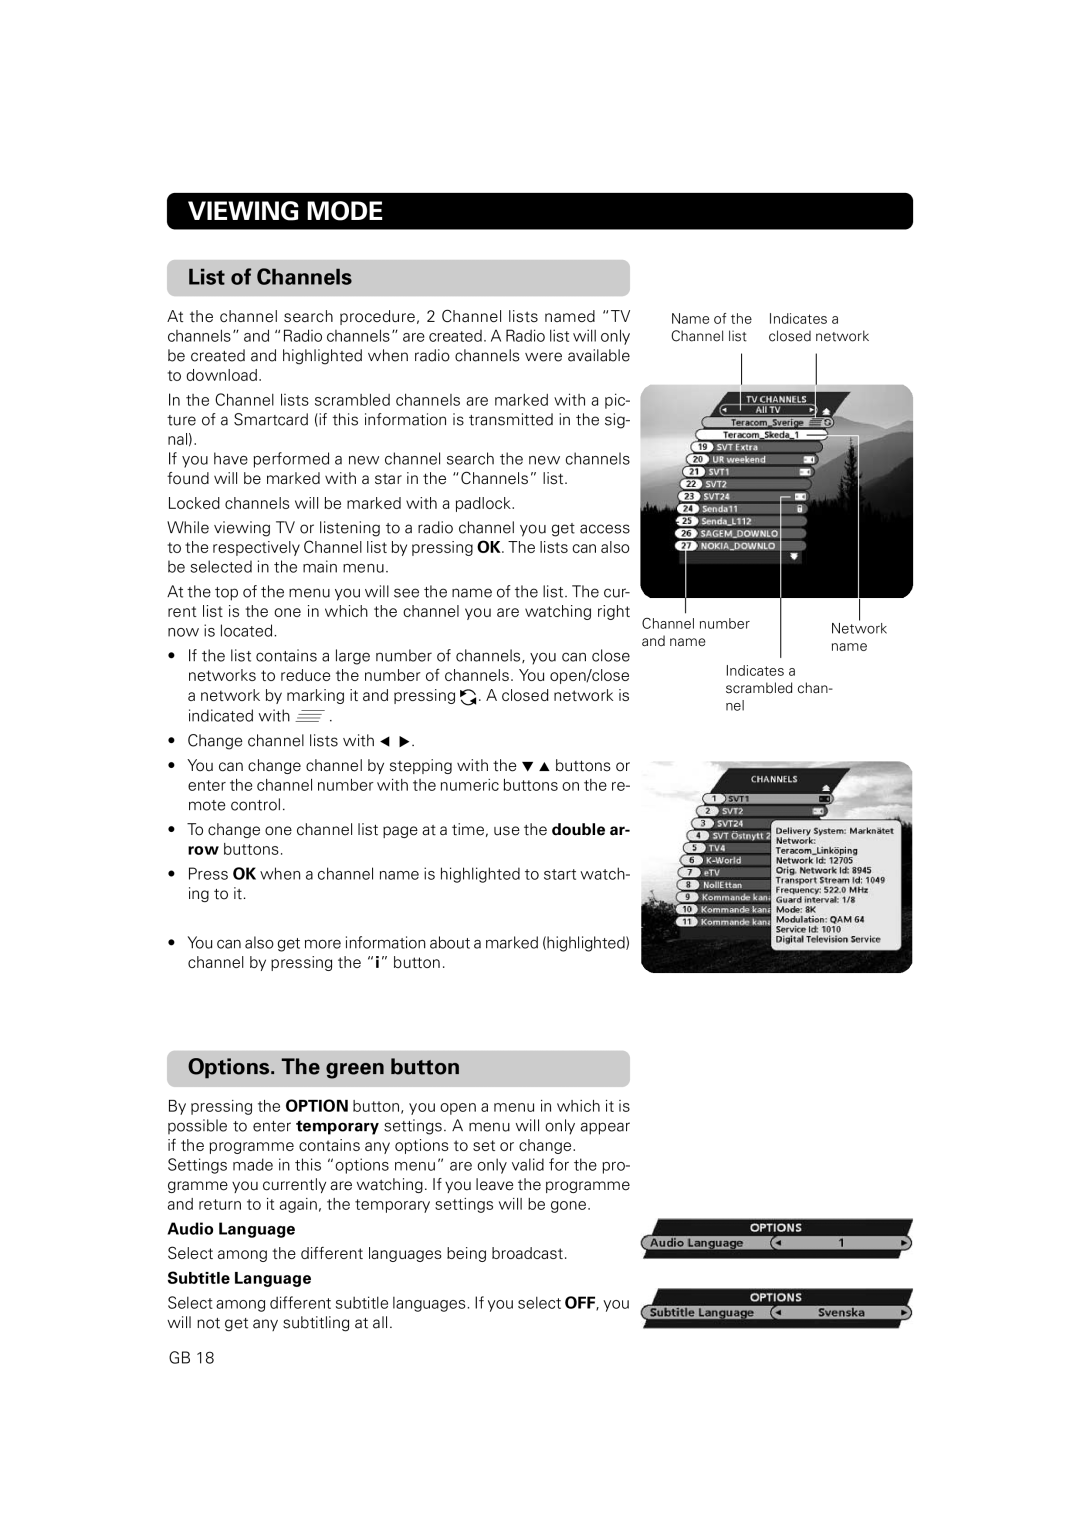 Nokia 9828 owner manual List of Channels, Options. The green button, Viewing Mode, Audio Language, Subtitle Language 